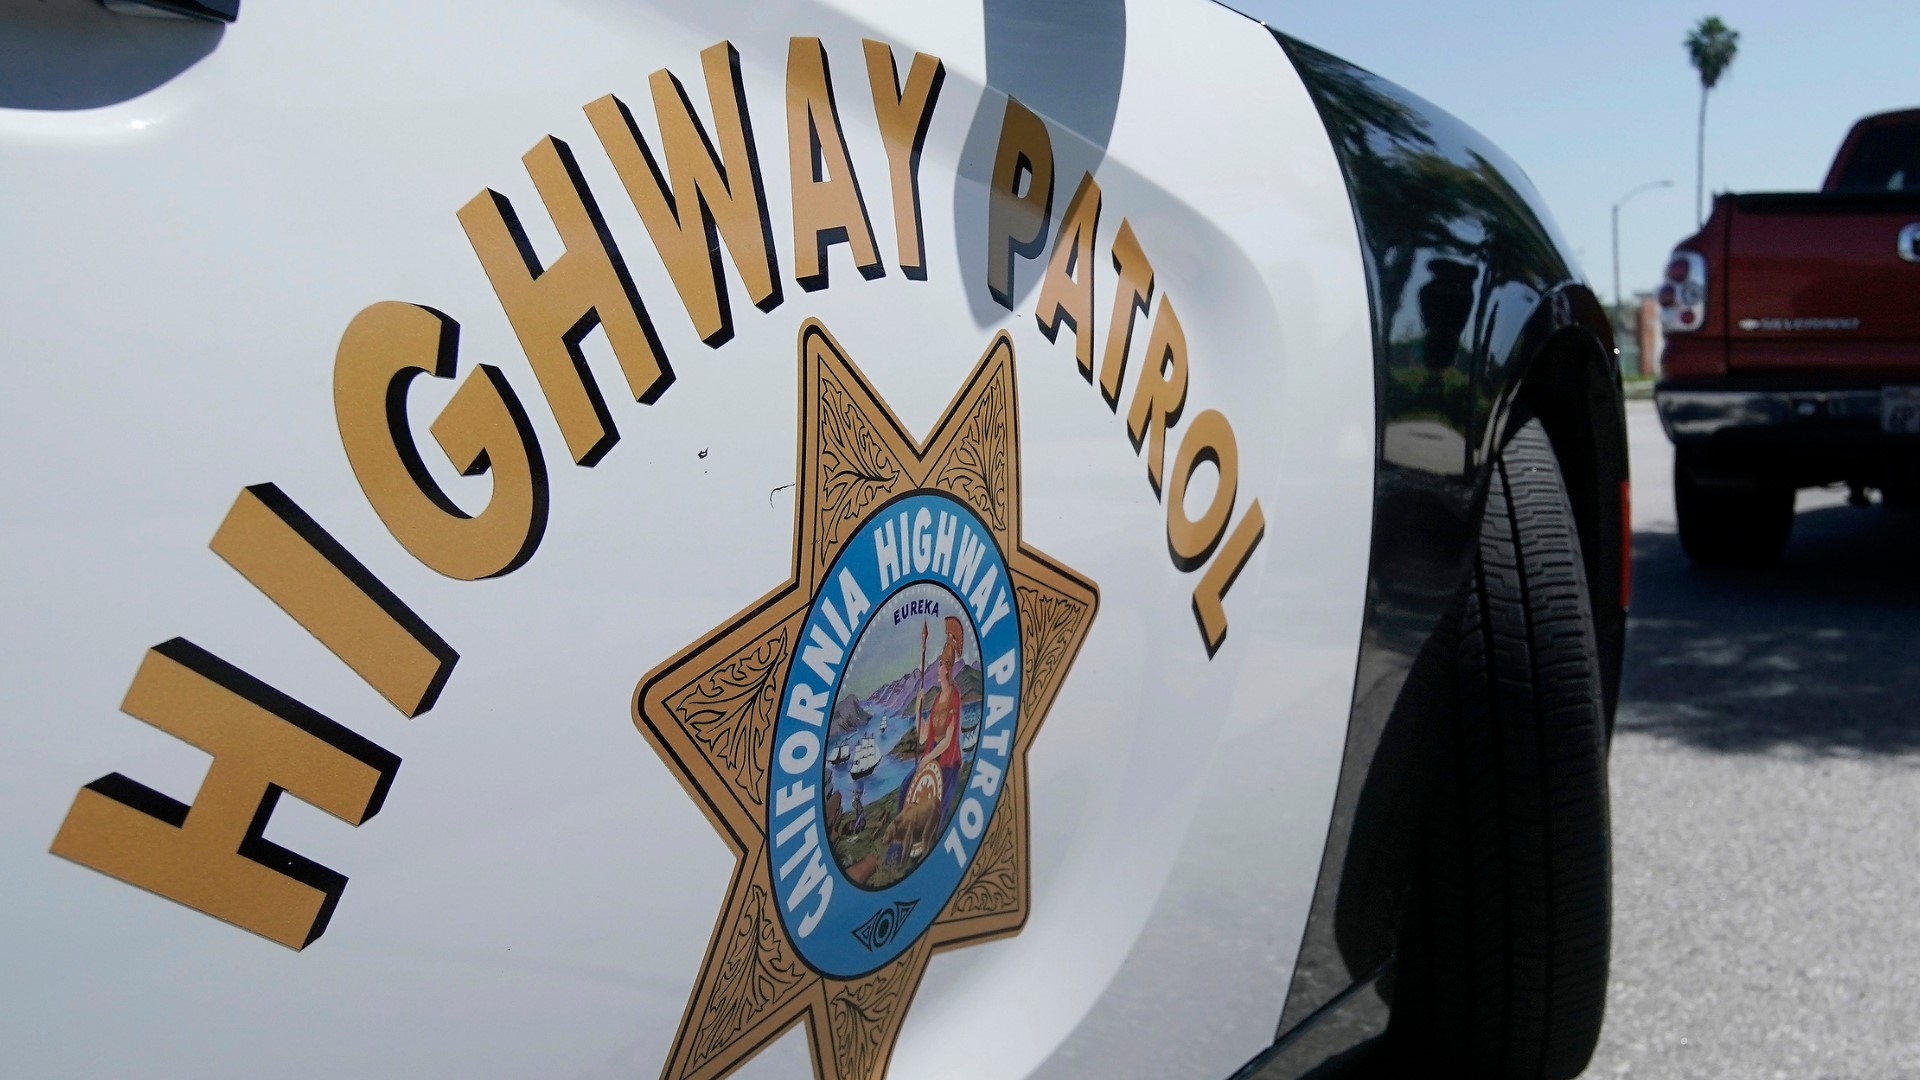 CHP officials said a woman was hit by a truck in-between the fourth and fifth lanes of Interstate 5 while she was walking across the highway.